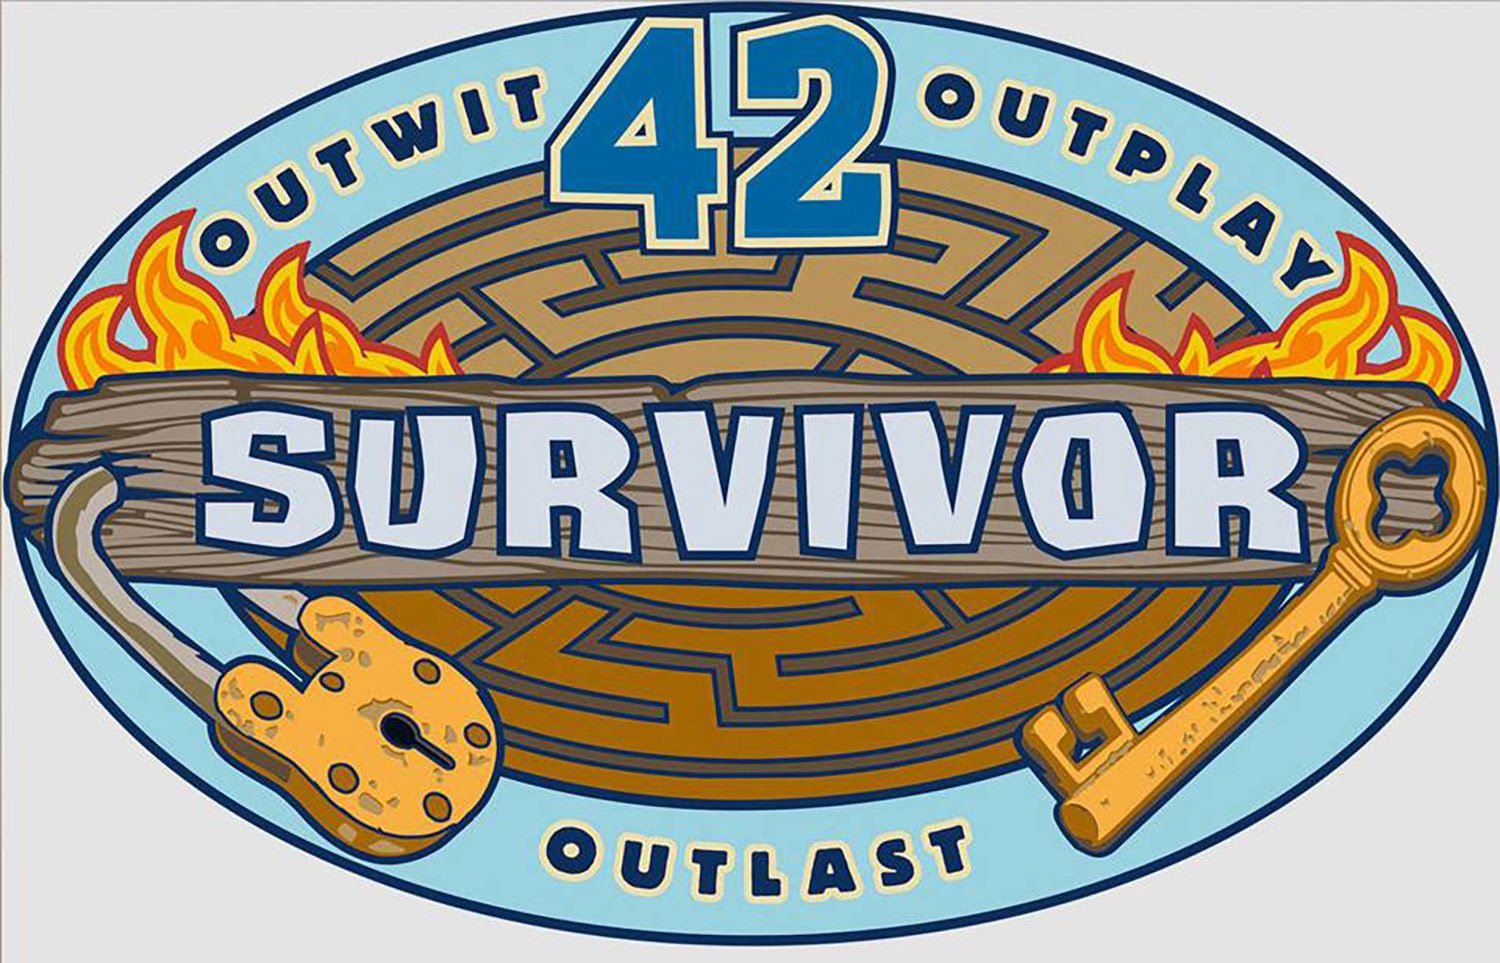 America's reality show - Survivors 42. 
Survivor 42 filming location: where is the show filmed?